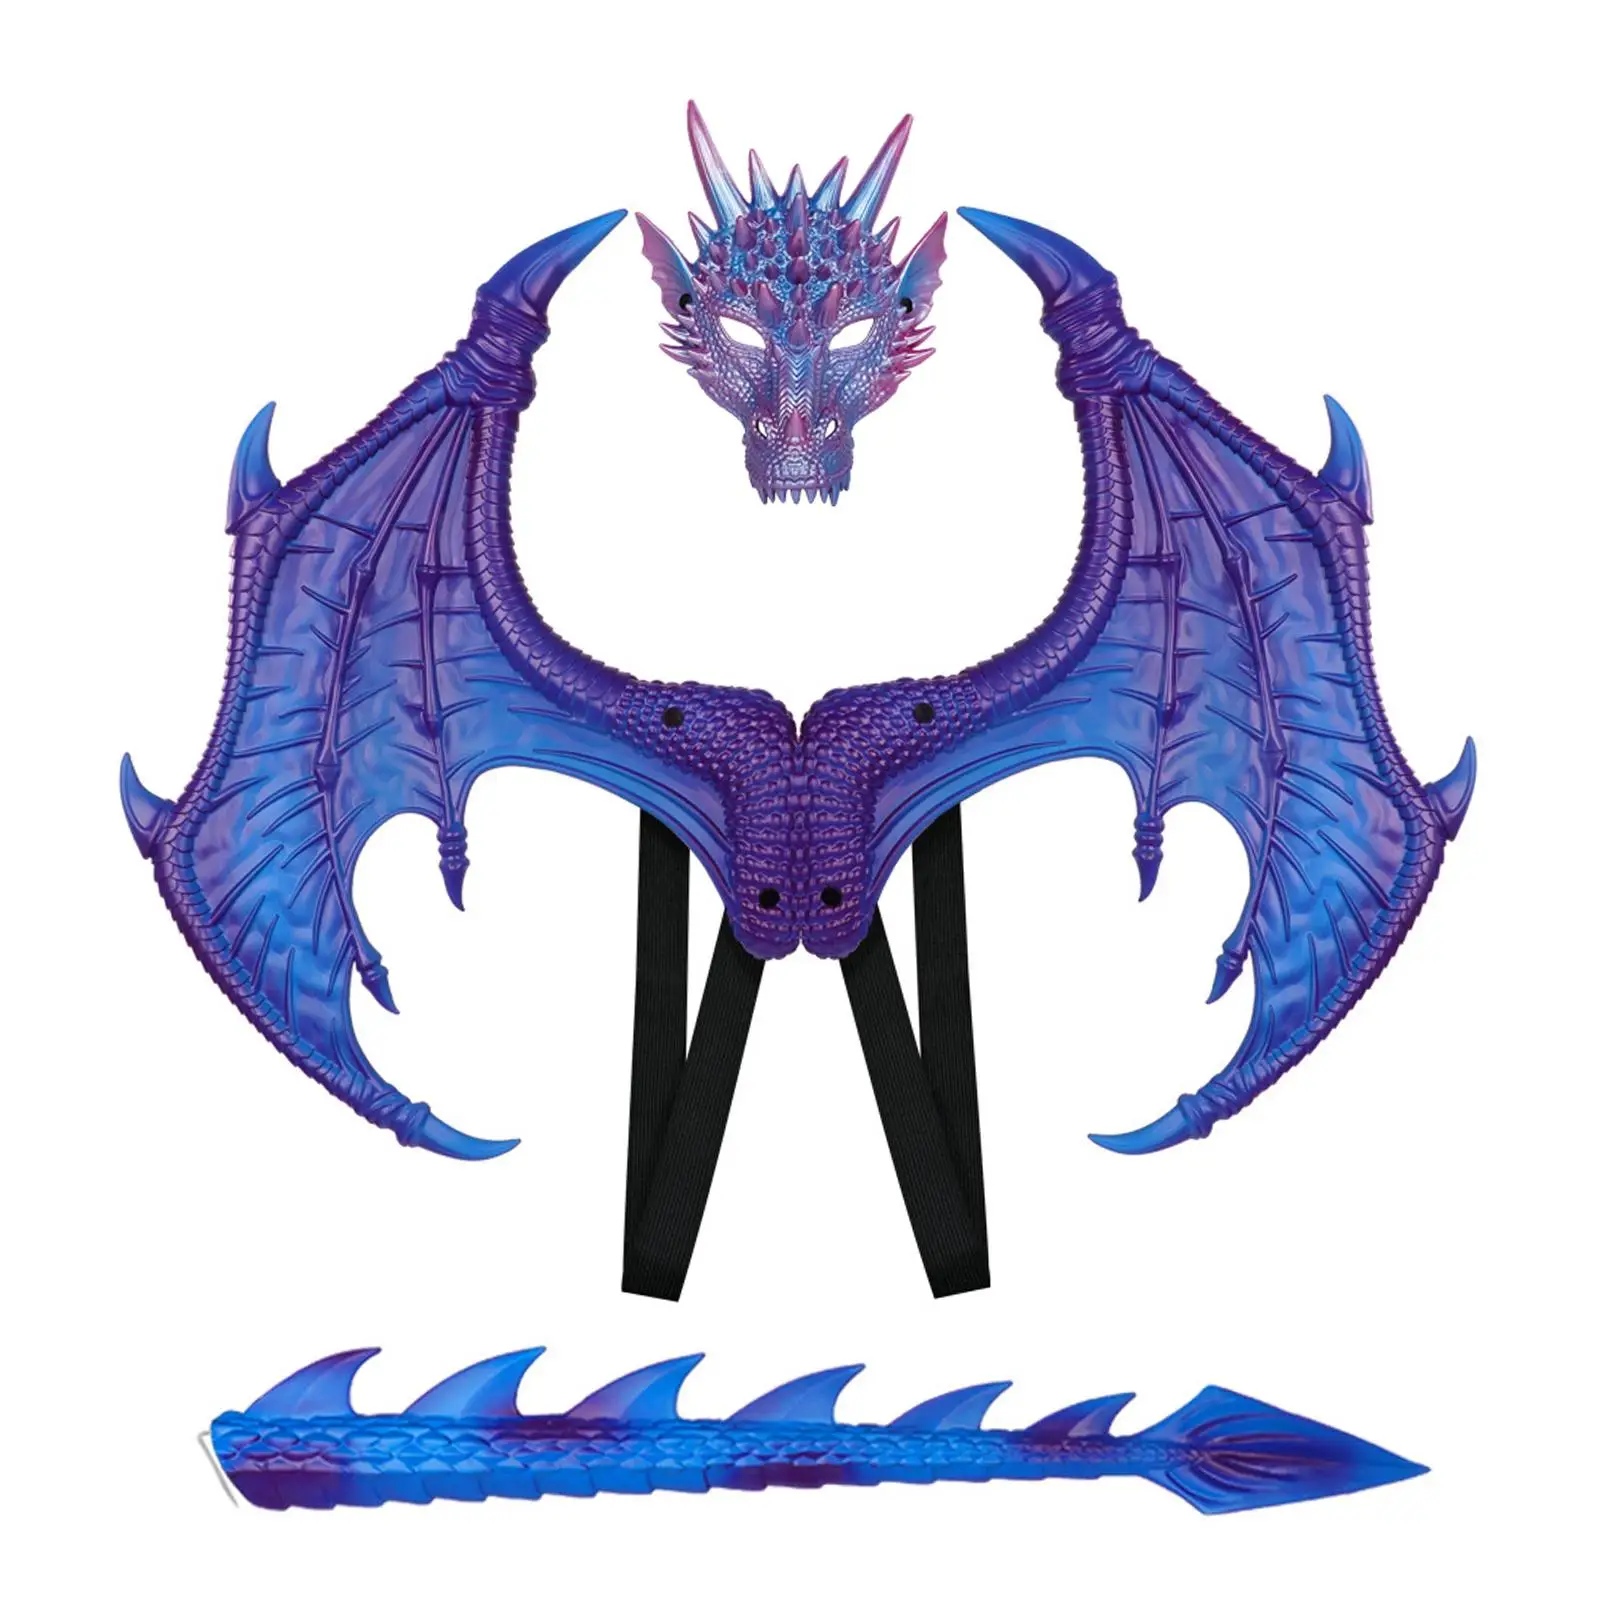 

Kids Dragon Costume Dinosaur Wings Tail Mask Dancing Party for Masquerade Nightclub Fancy Dress Carnivals Festival Cosplay